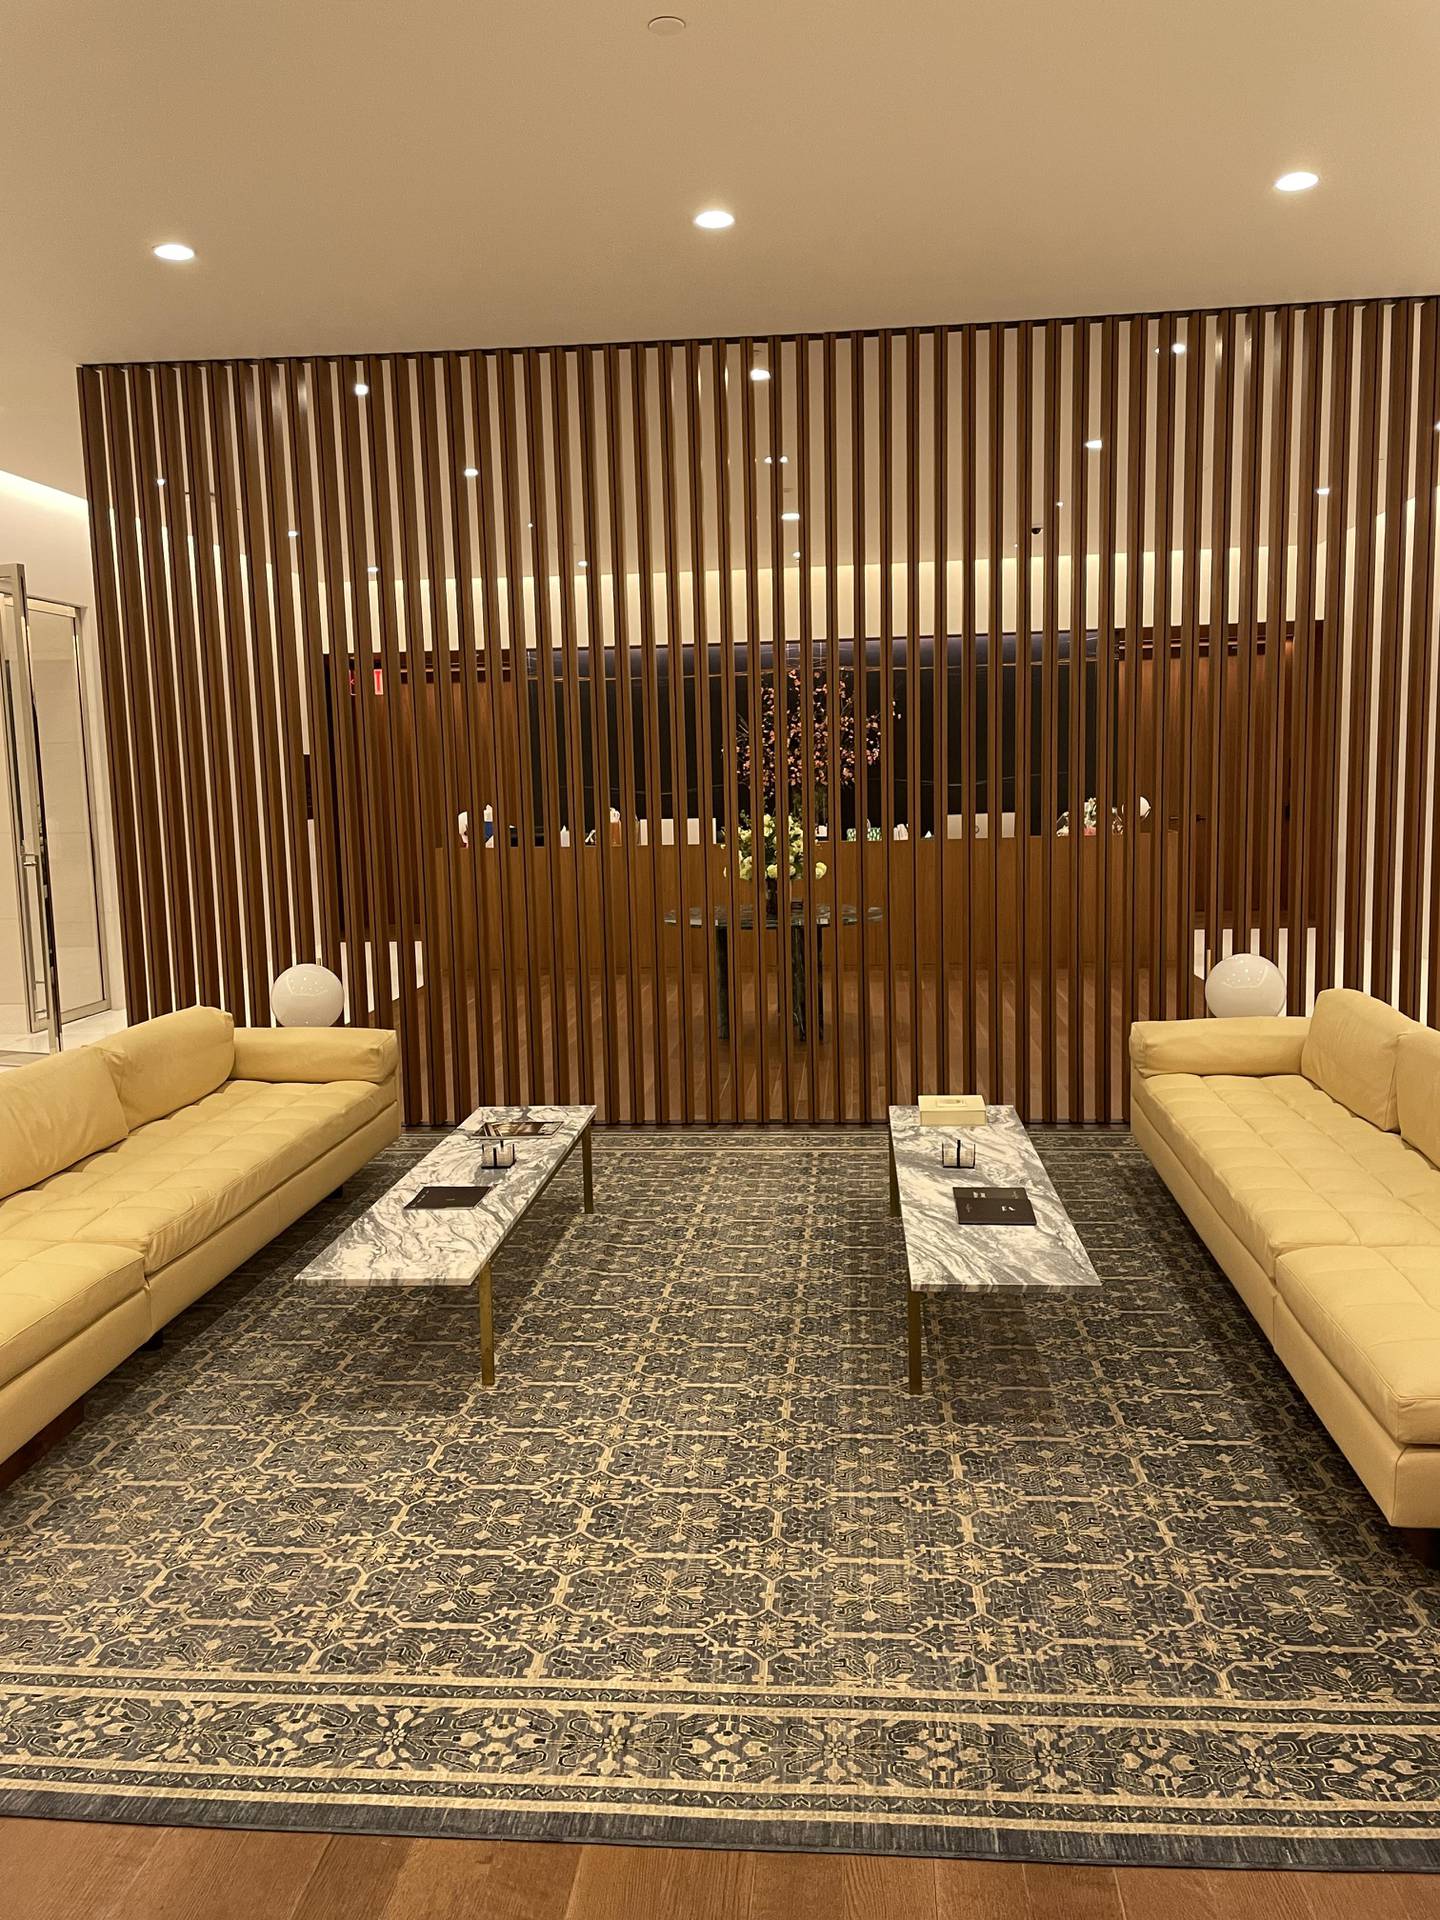 A reception area at the UAE's UN Mission. Bryant Harris / The National